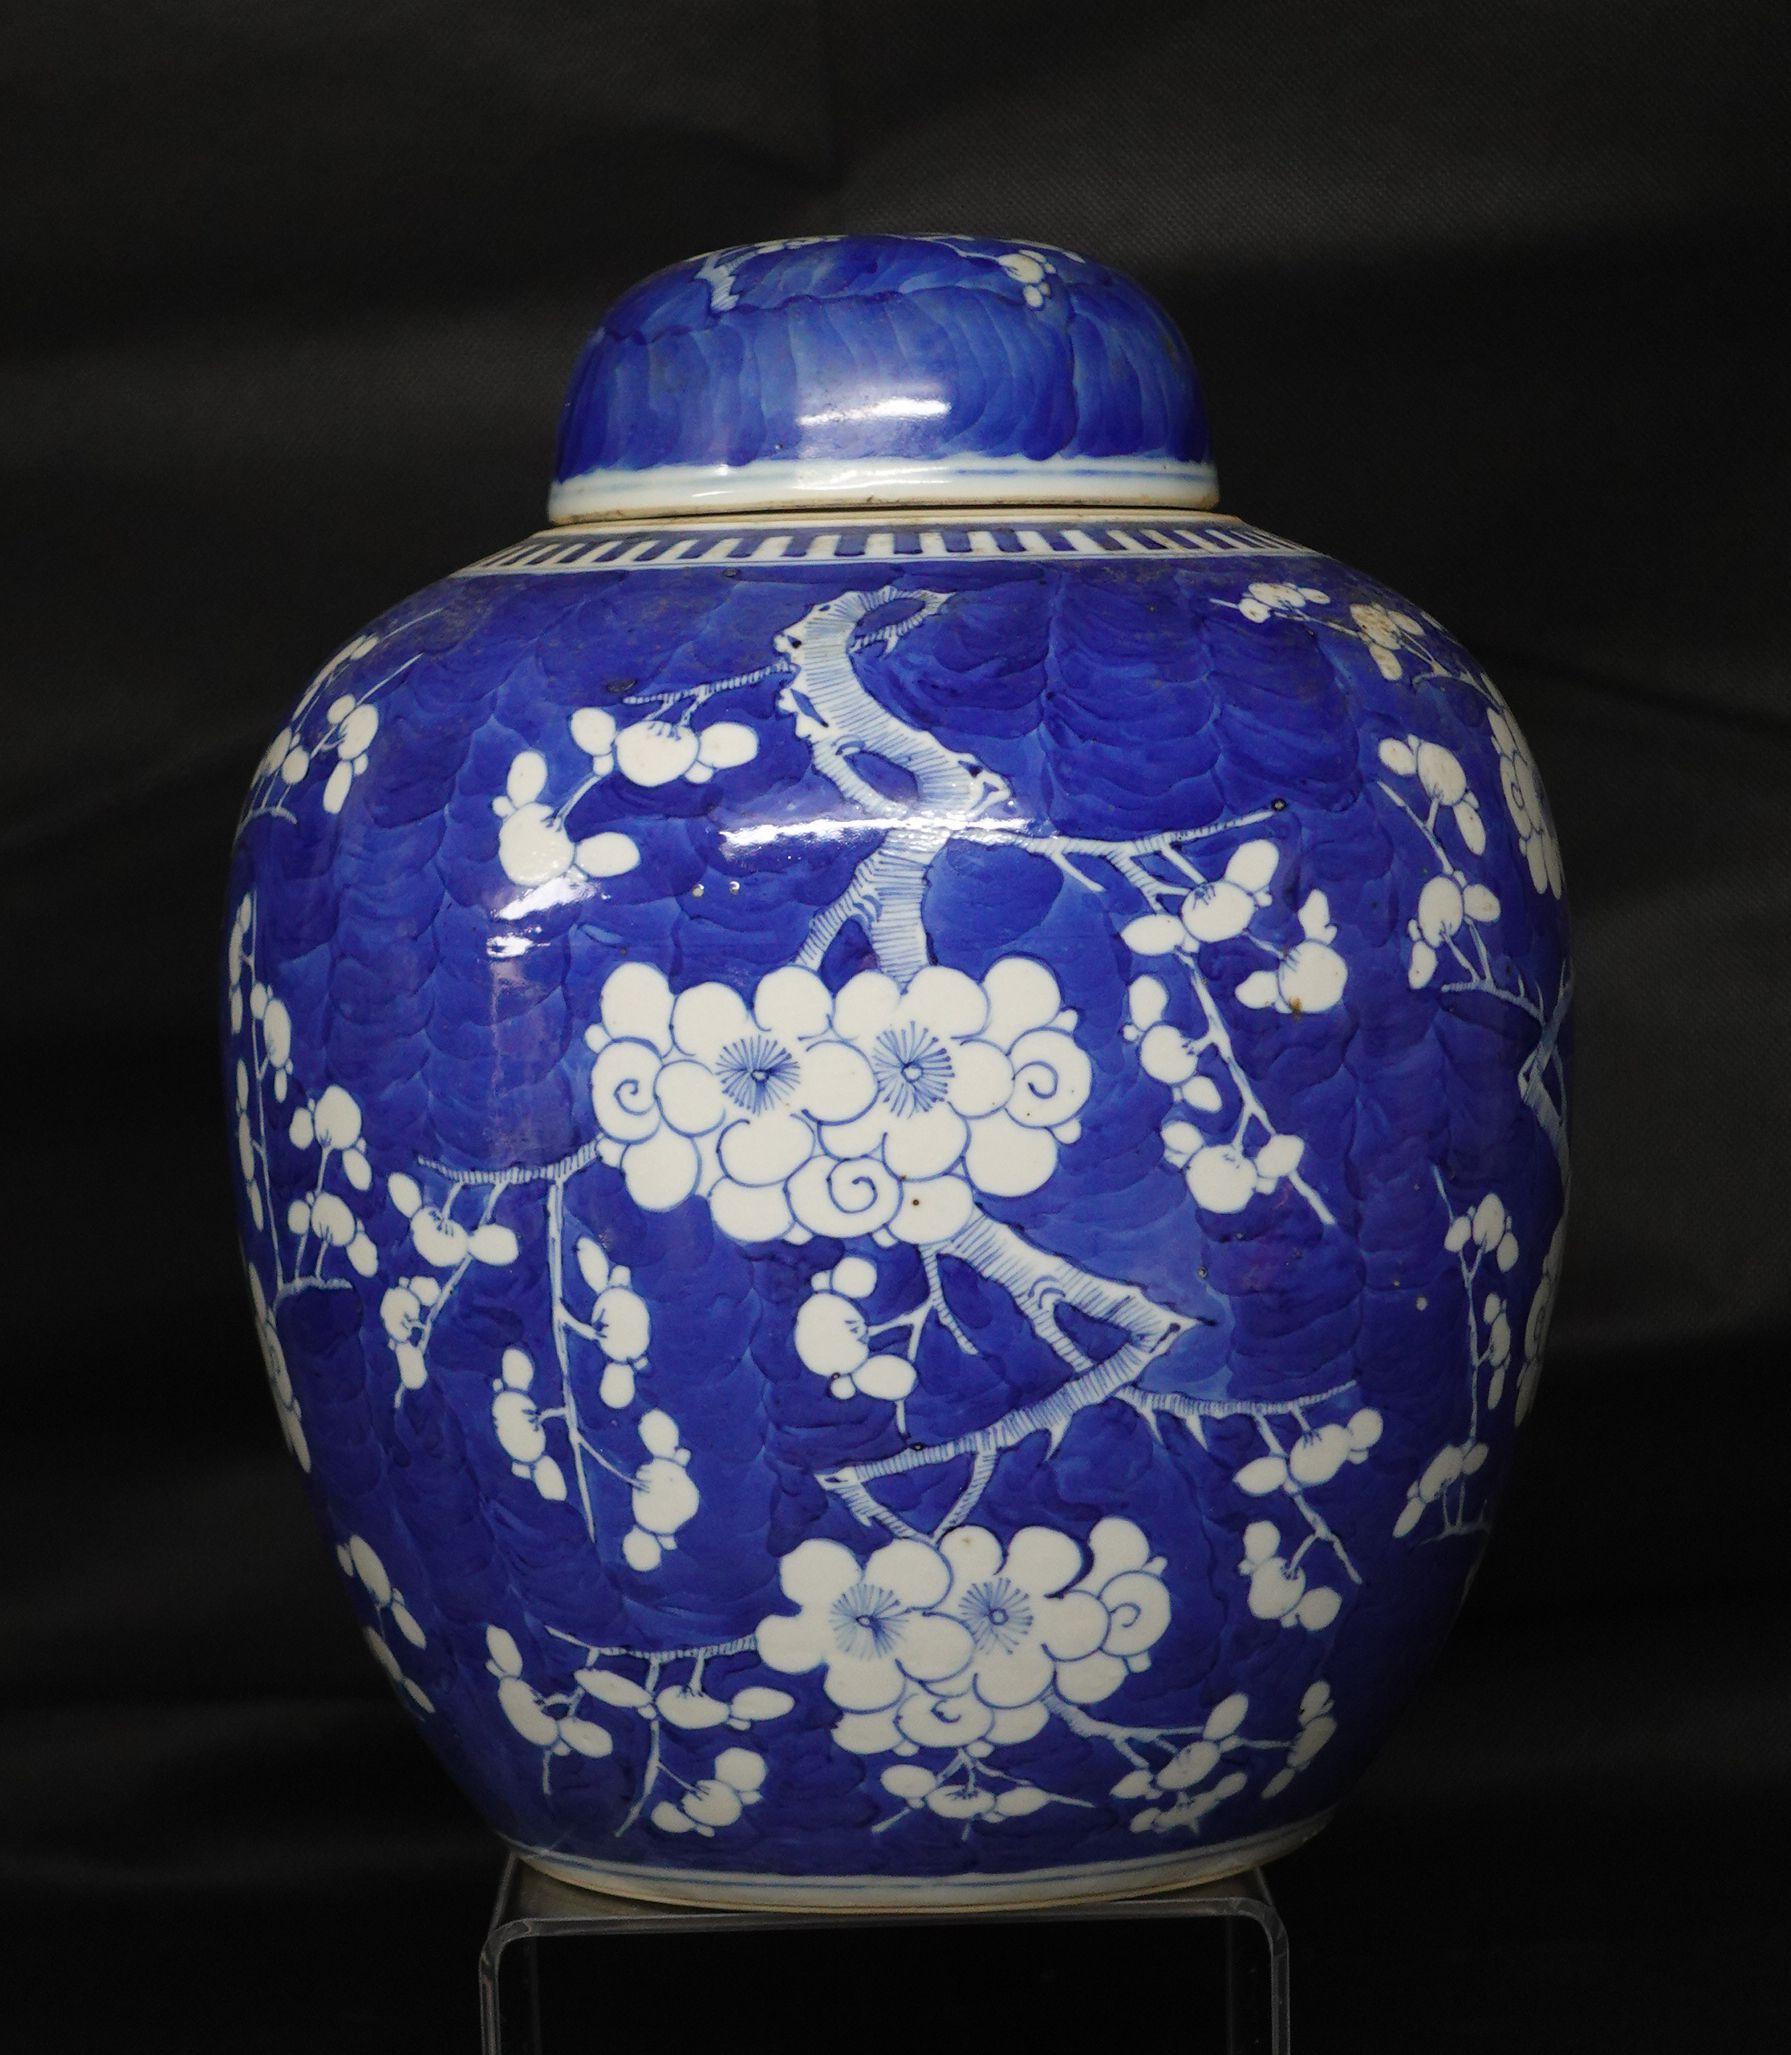 Chinese export blue and white porcelain hawthorn rose jar with lid, 19th century, marked at the bottom.